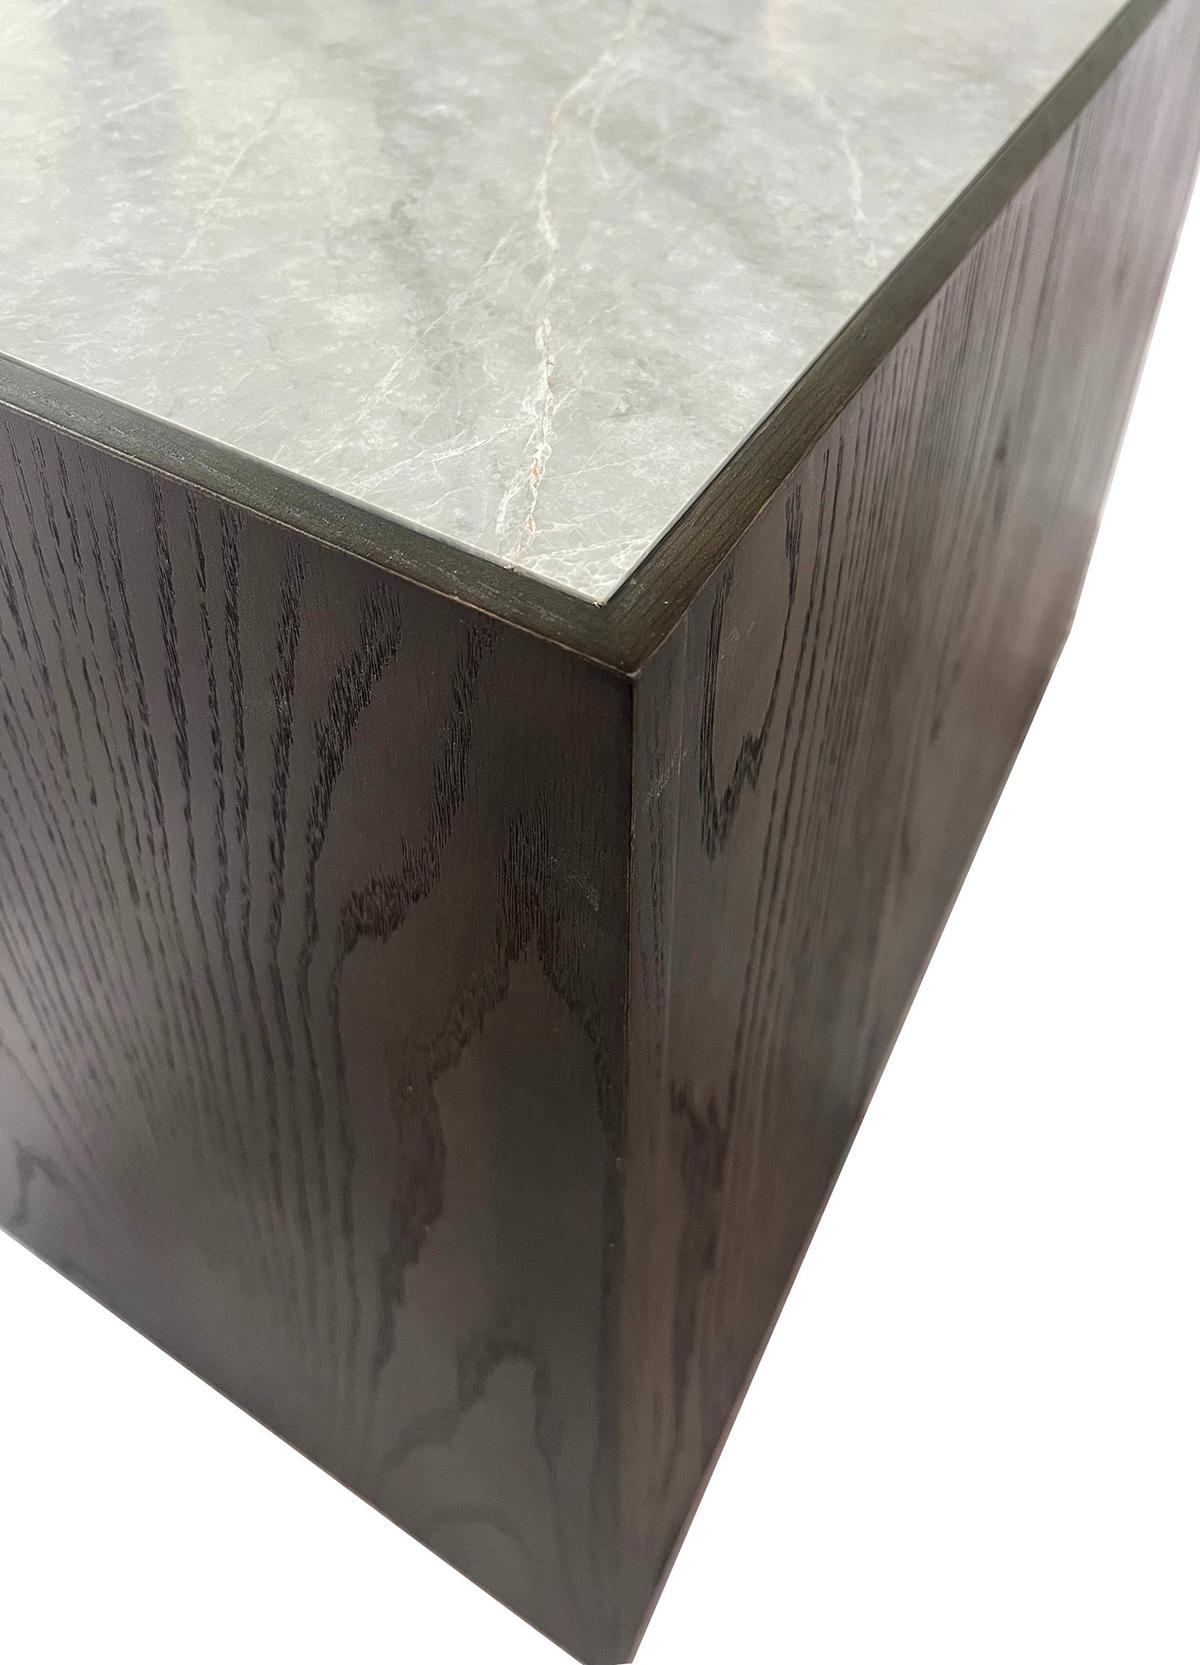 Liguria Nightstand: Where Minimalistic Design Meets Wood & Natural Stone Beauty In New Condition For Sale In Miami Beach, FL